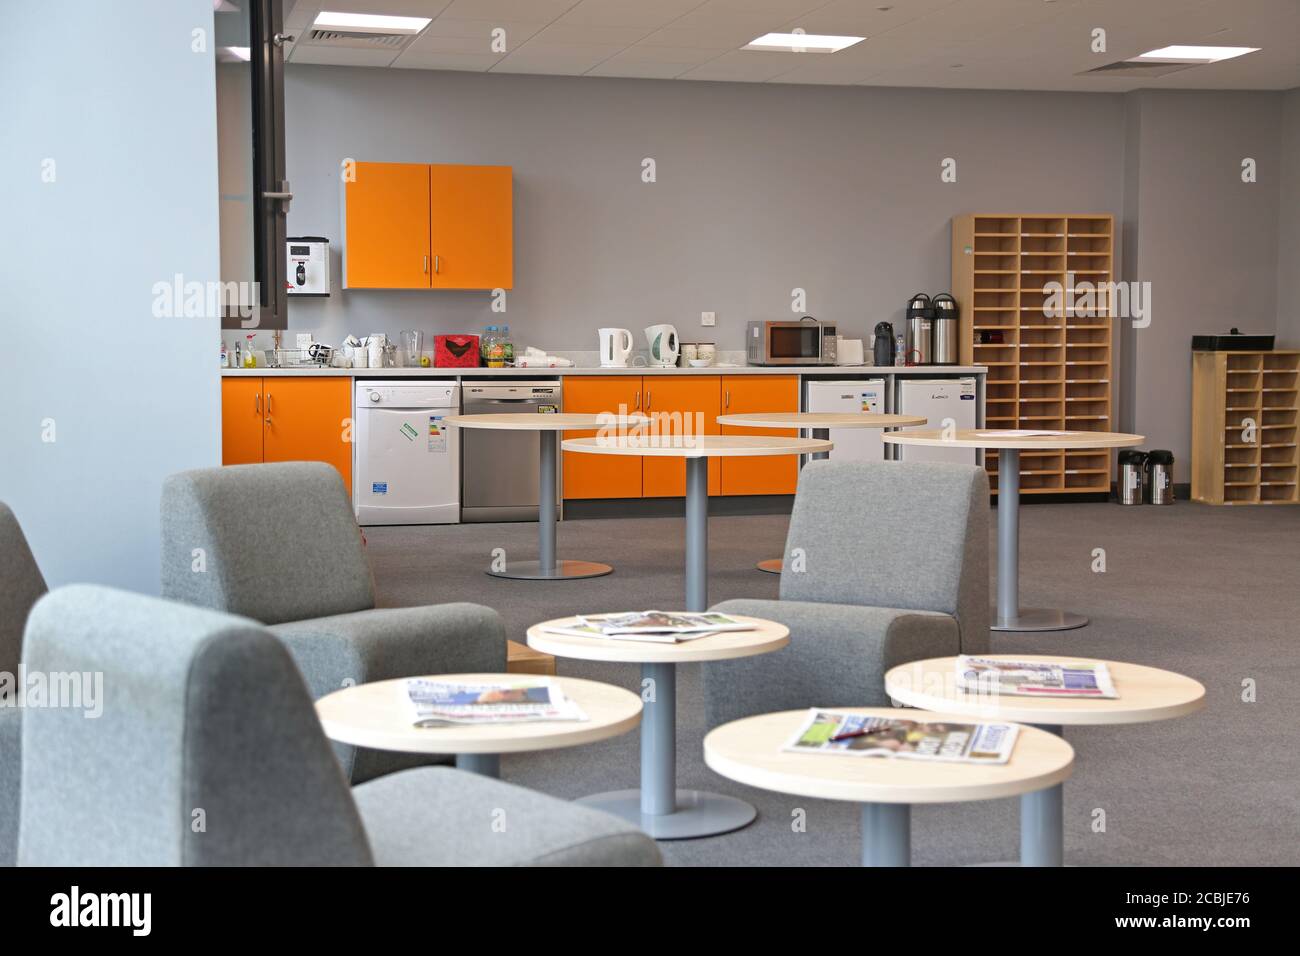 Staff room in a newly completed London secondary school. Shows kitchen area with fridges and dishwashers plus seating area in foreground. Stock Photo